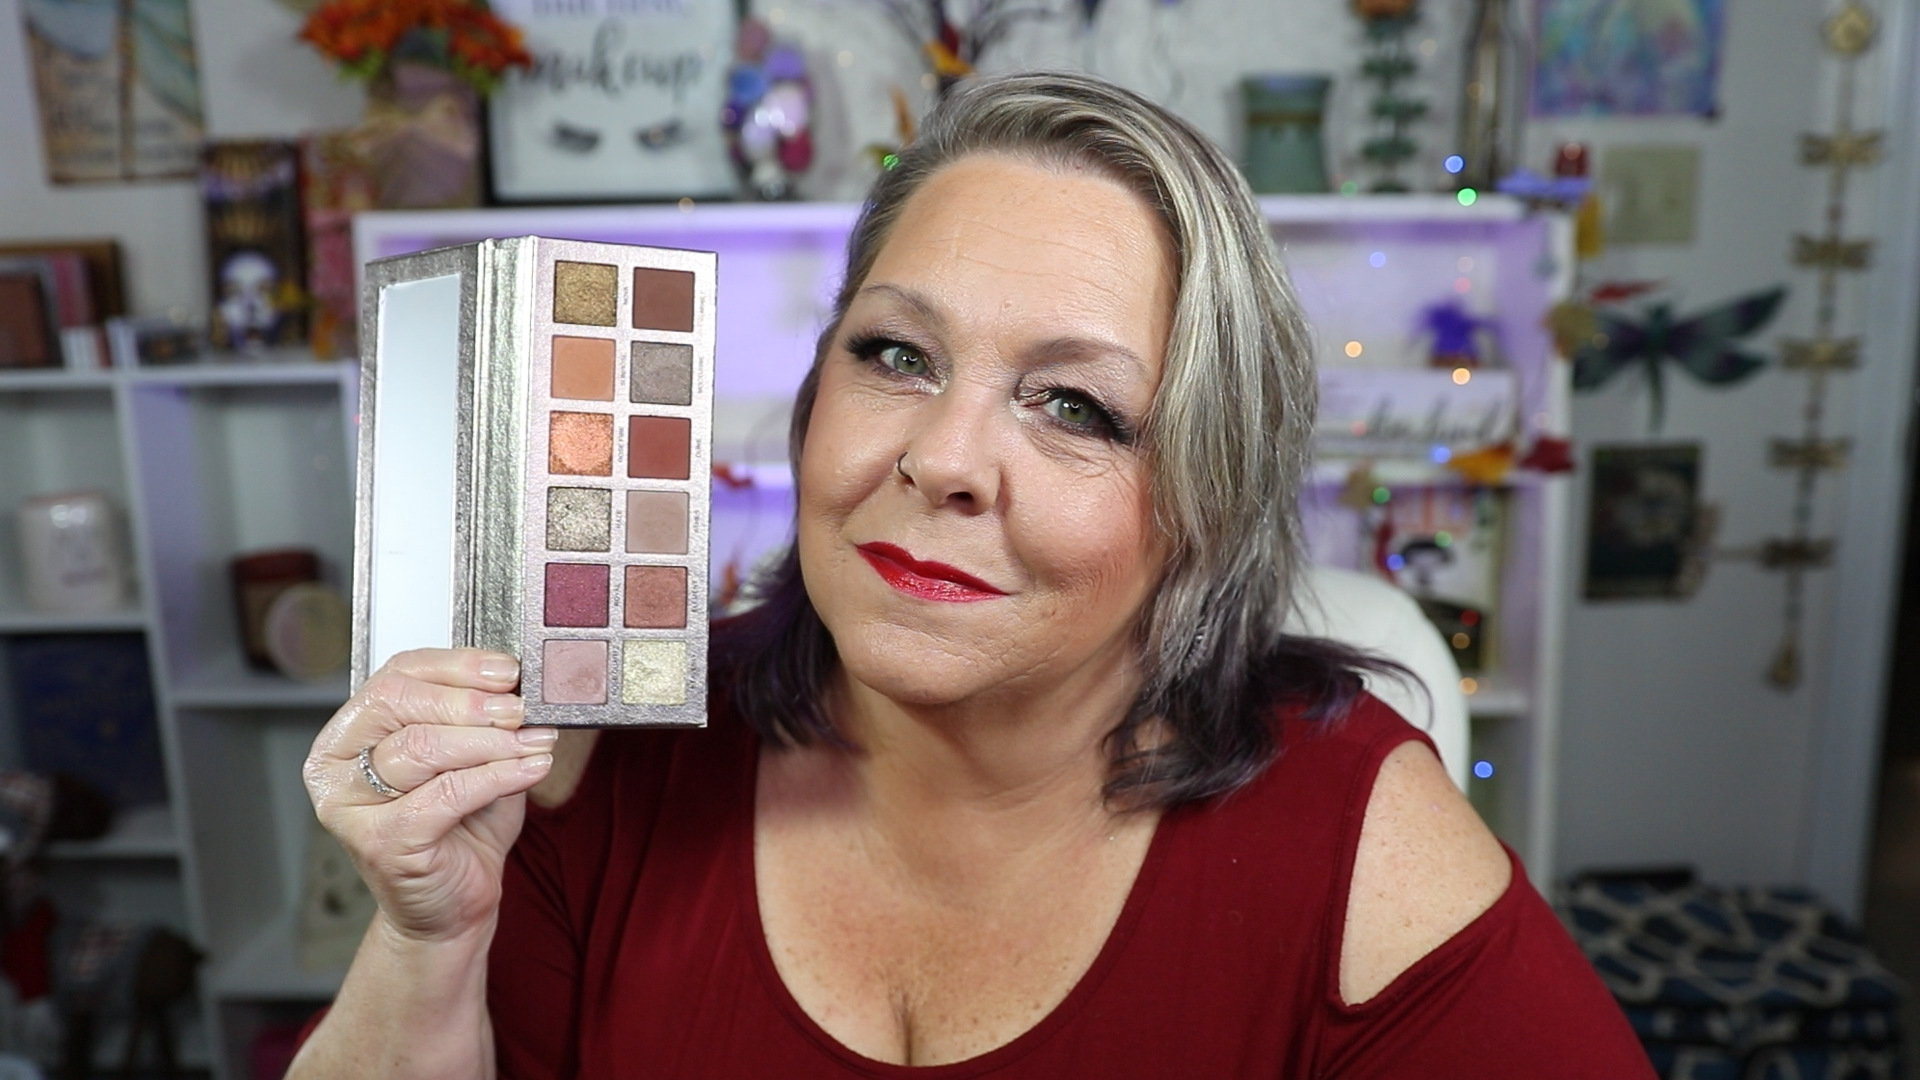 Abh Rose Metals Palette Review And Swatches Over 50 Leanna Dalton